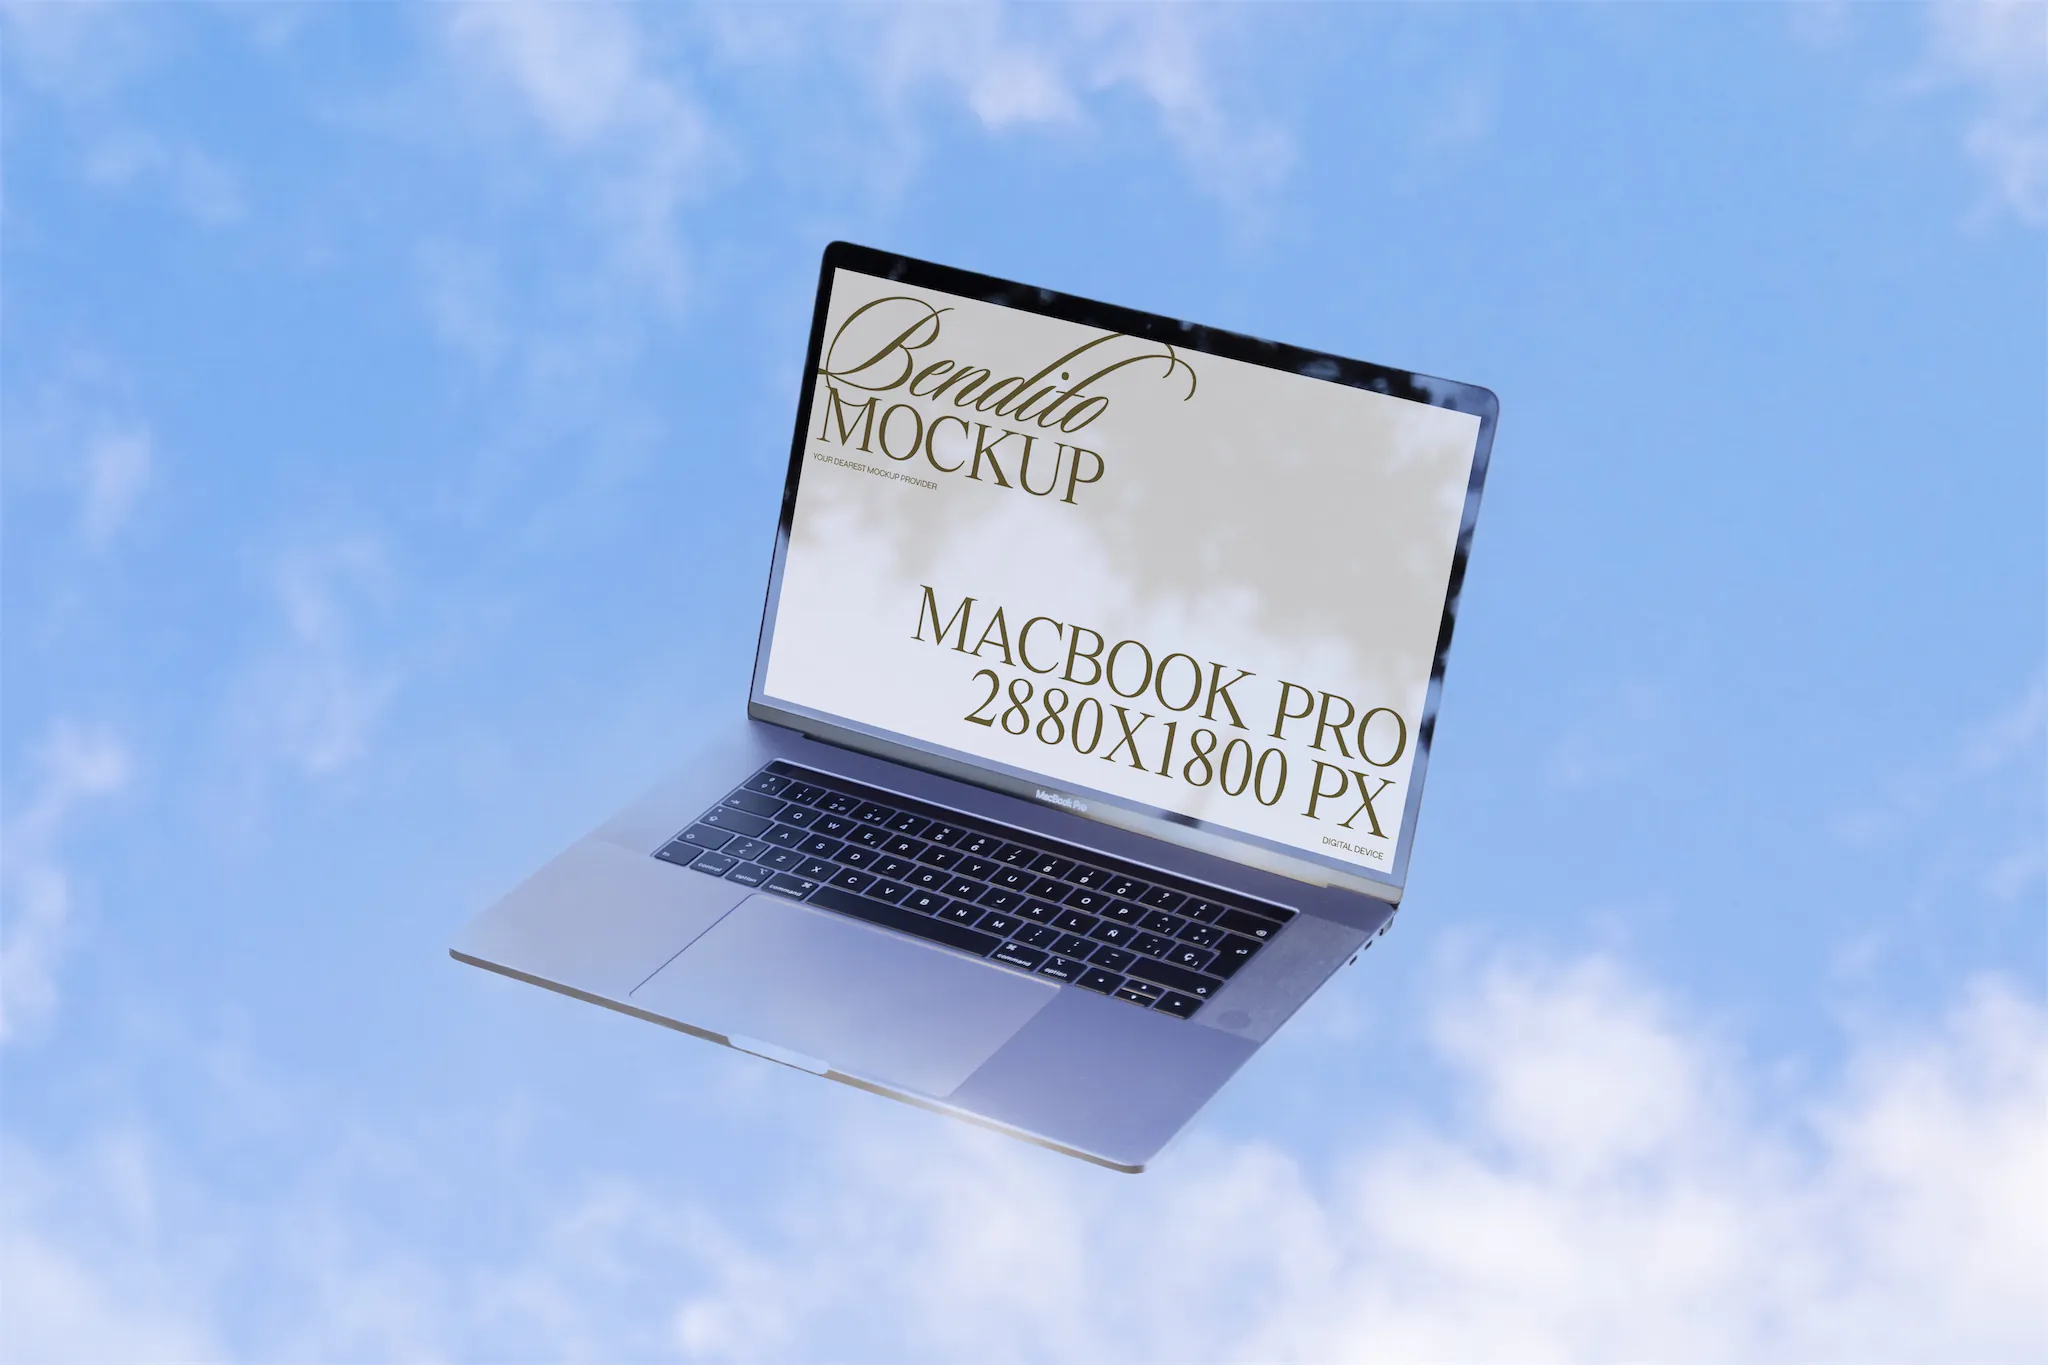 Macbook pro mockup with a sky background with clouds